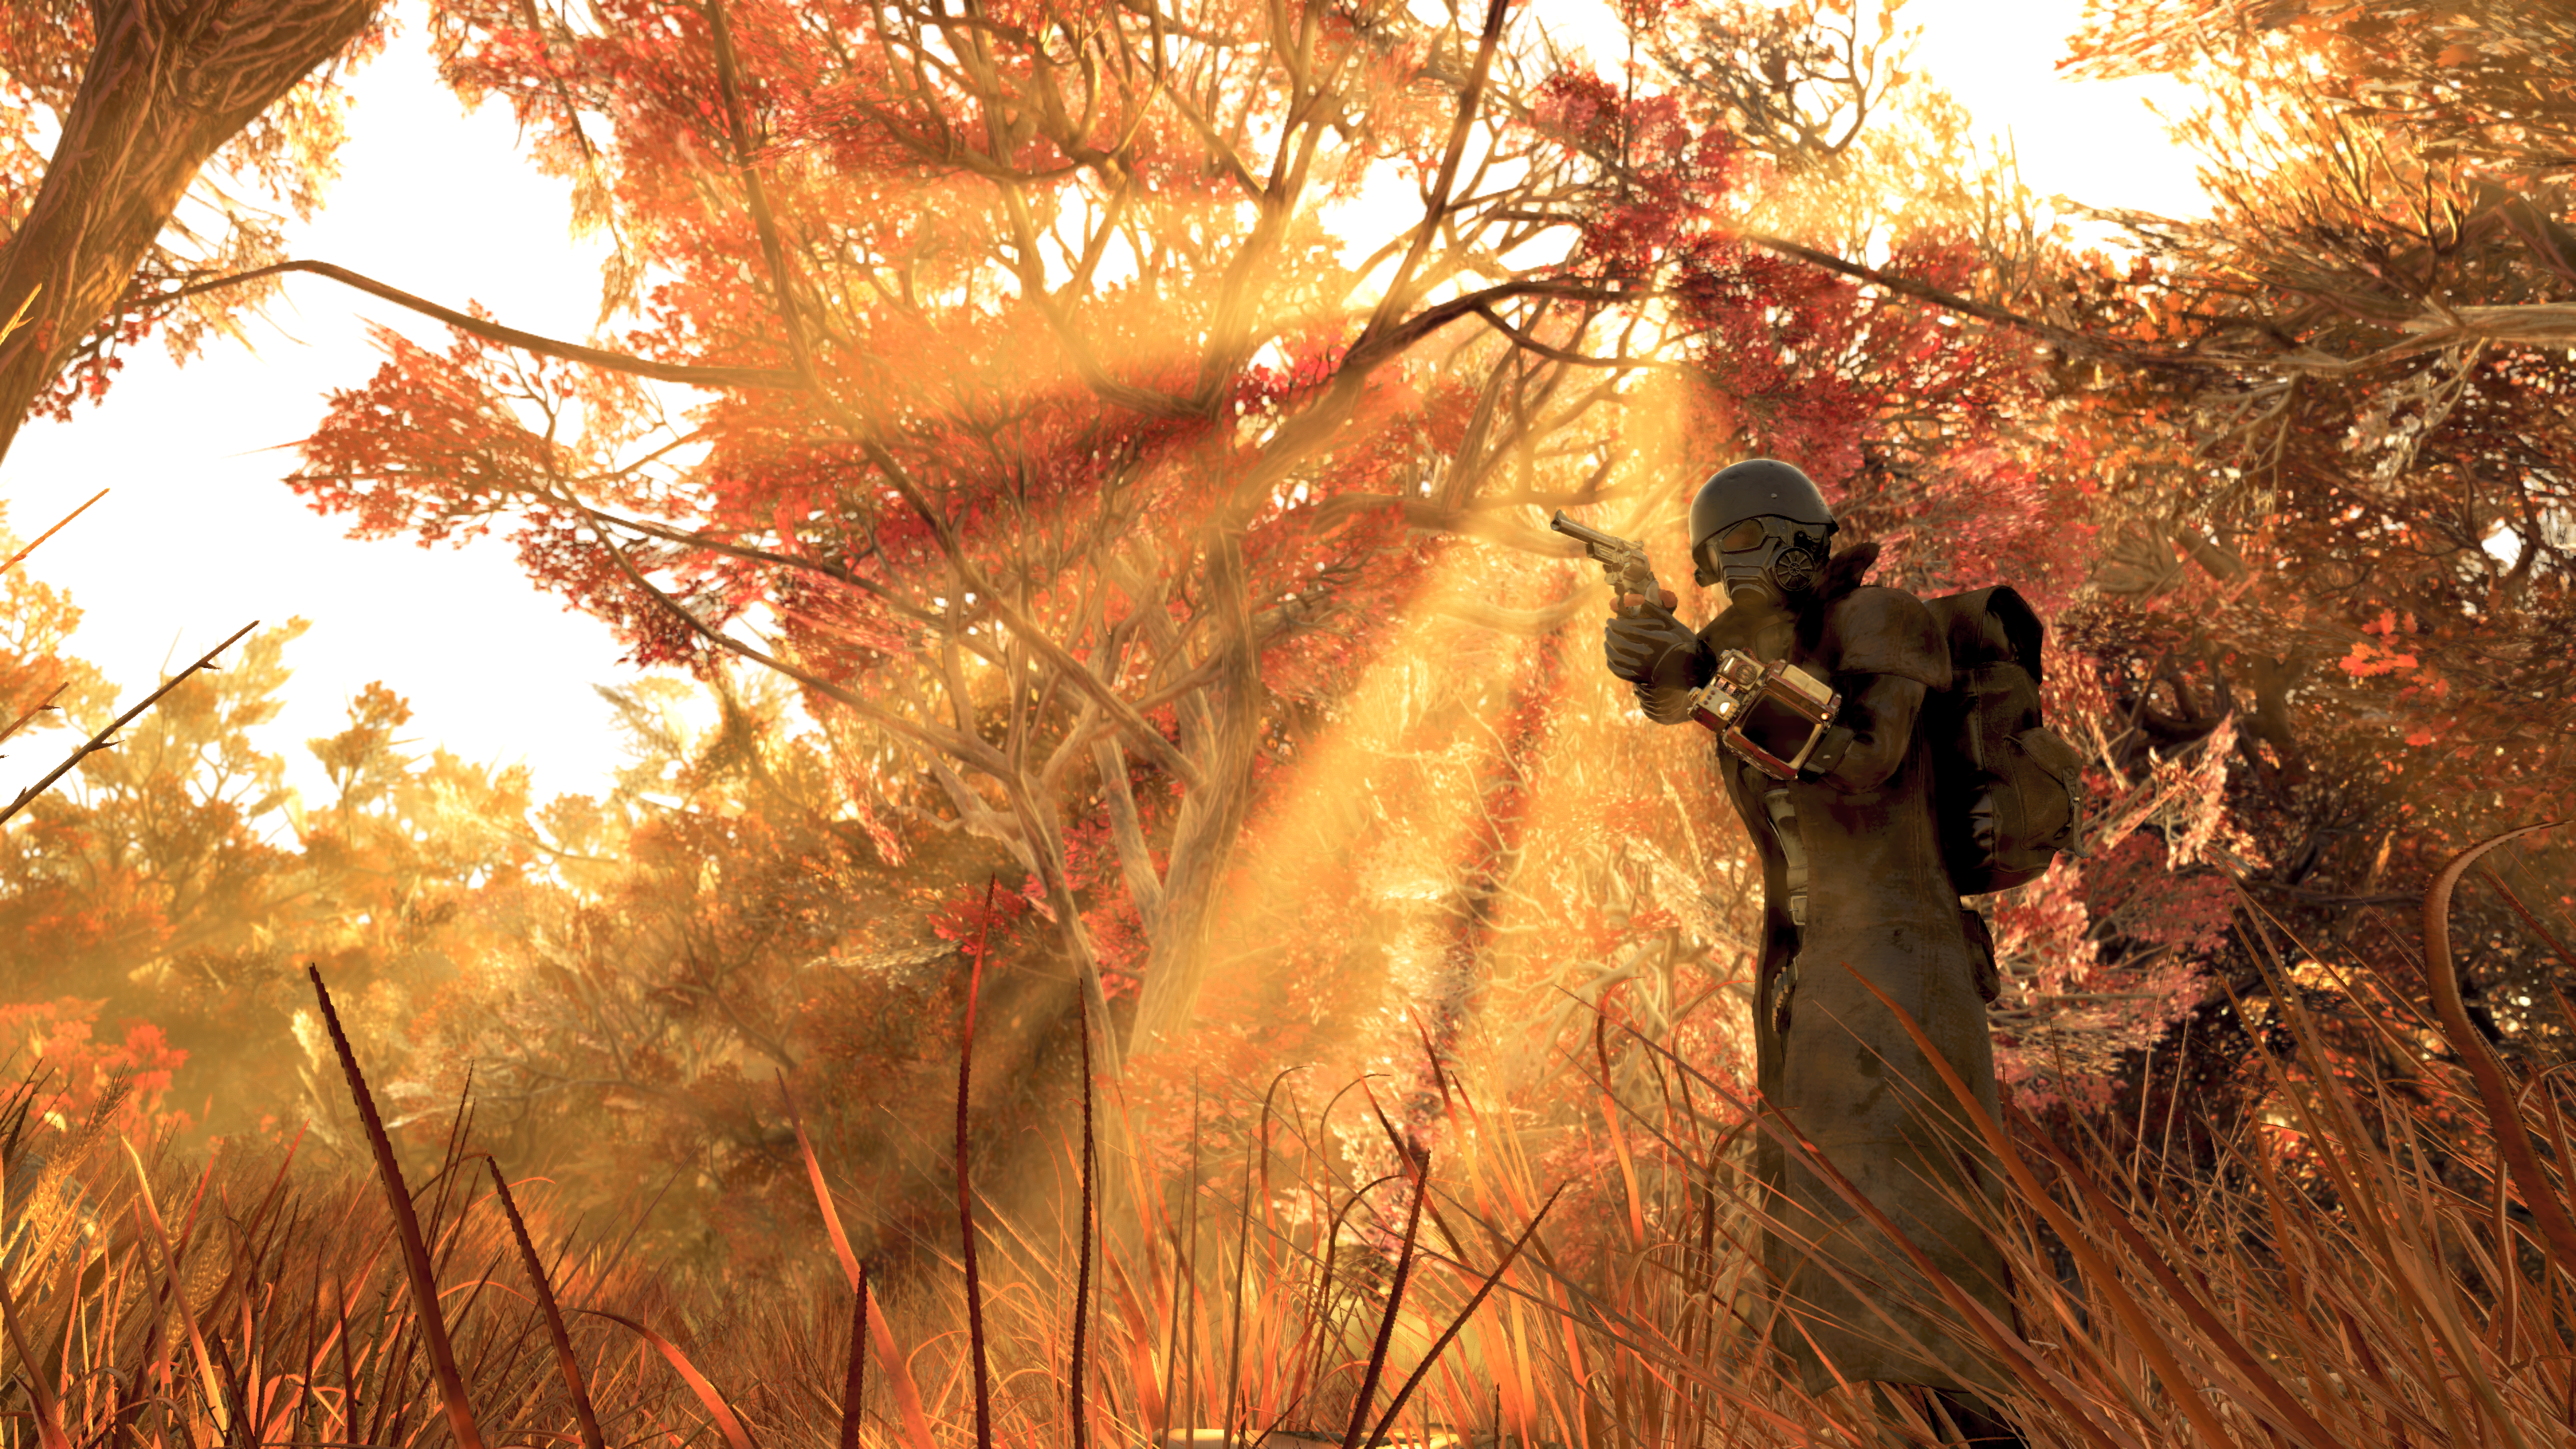 Fallout Fallout 76 Forest Apocalyptic Video Games Gun CGi Video Game Art Sunlight Trees Helmet Backp 3840x2160